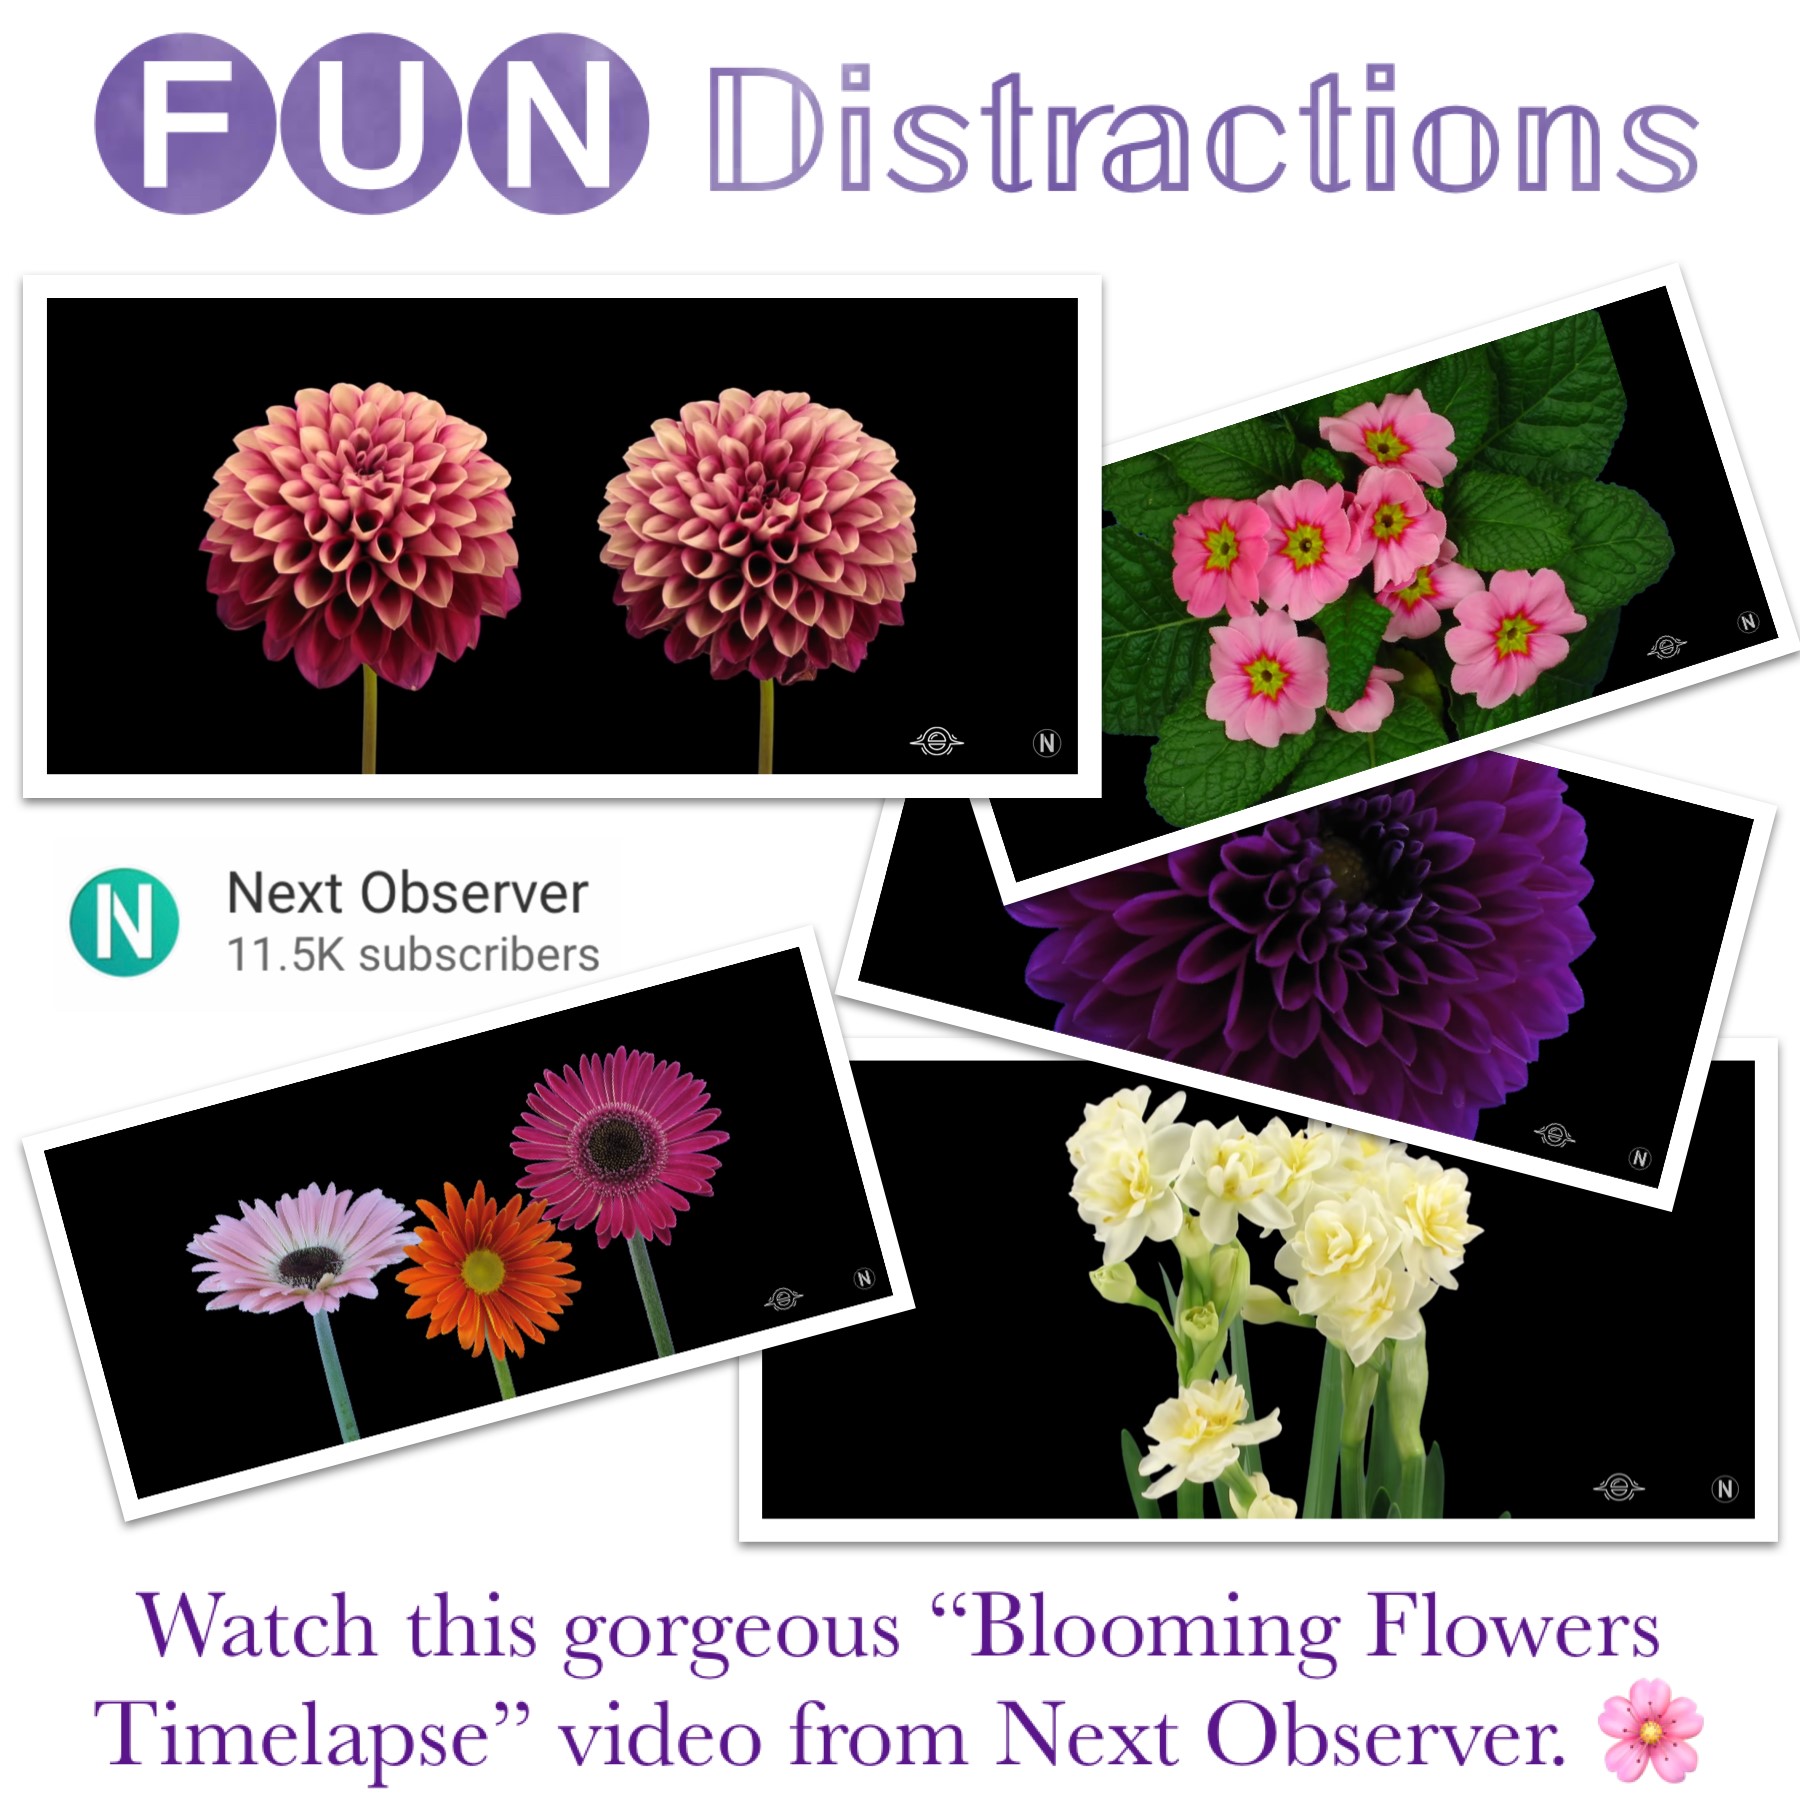 Images of flowers with text stating "Watch this gorgeous Blooming Flowers Timelapse video from Next Observer"